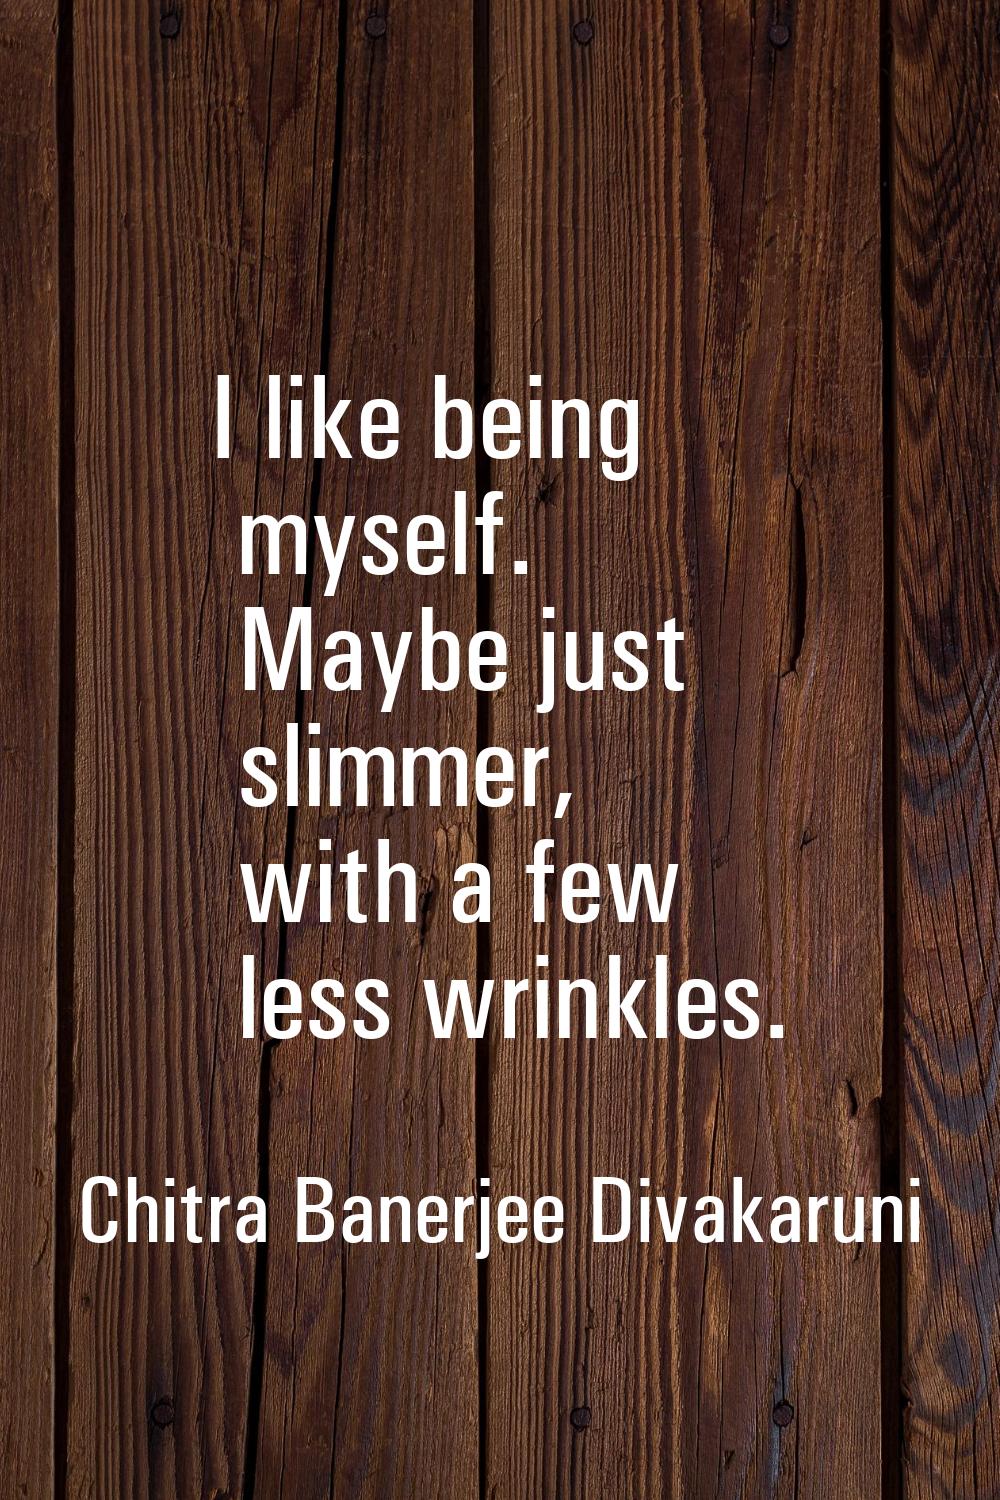 I like being myself. Maybe just slimmer, with a few less wrinkles.